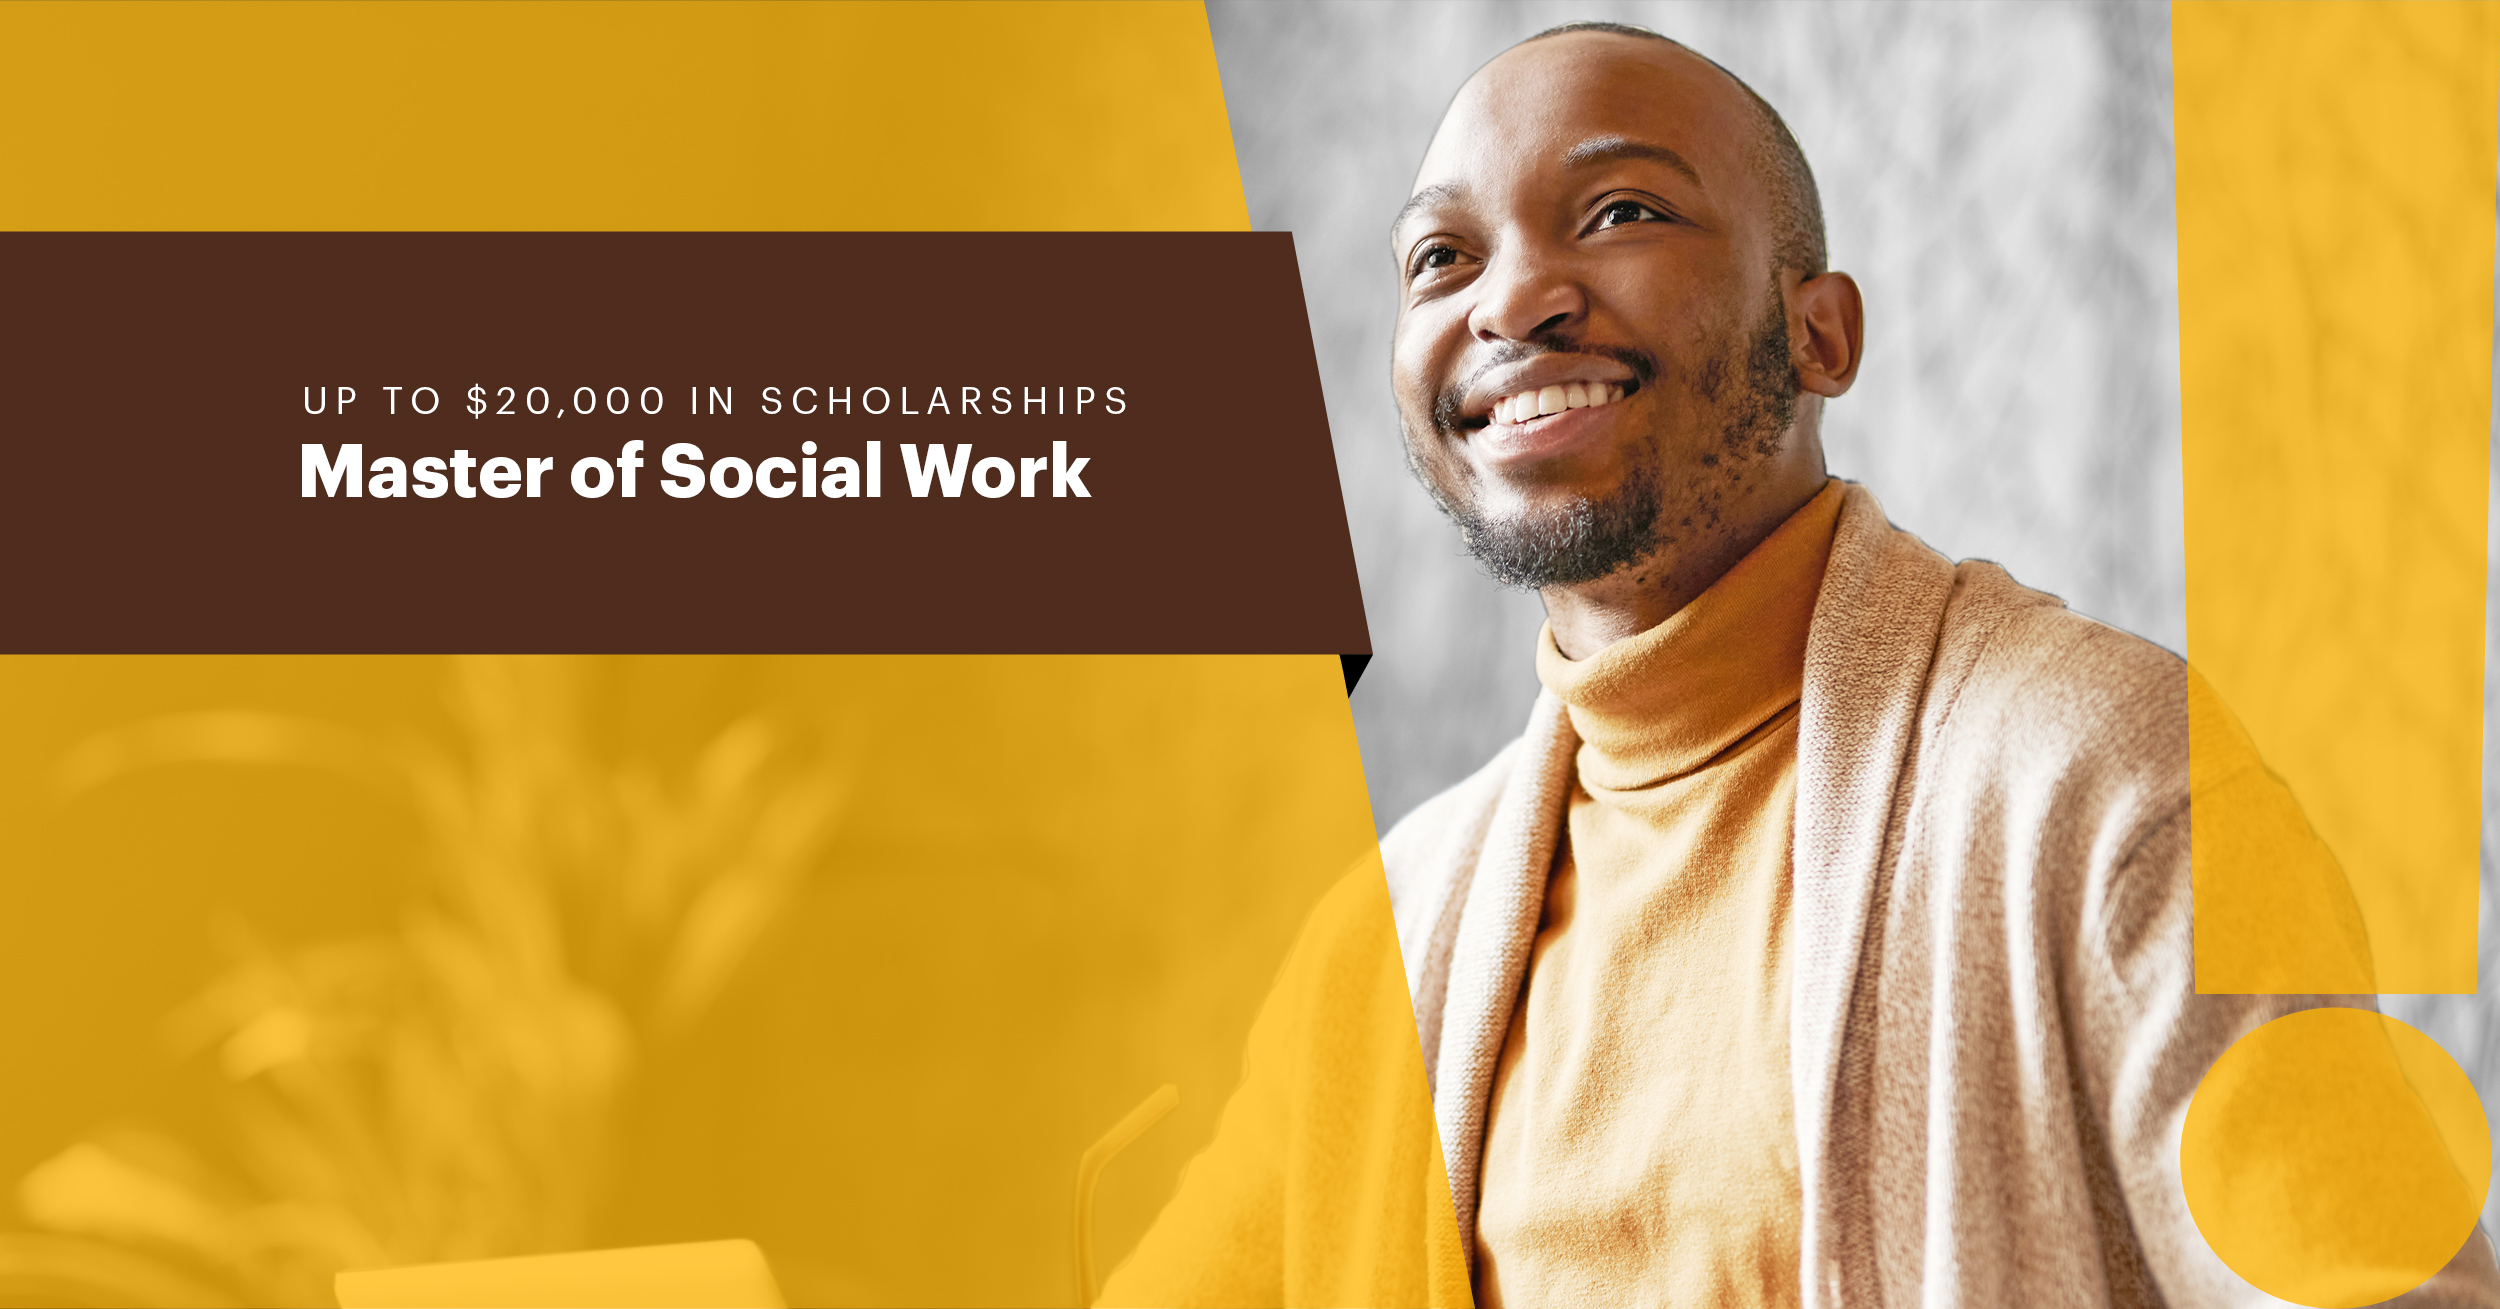 Up to $20,000 in scholarships Master of Social Work